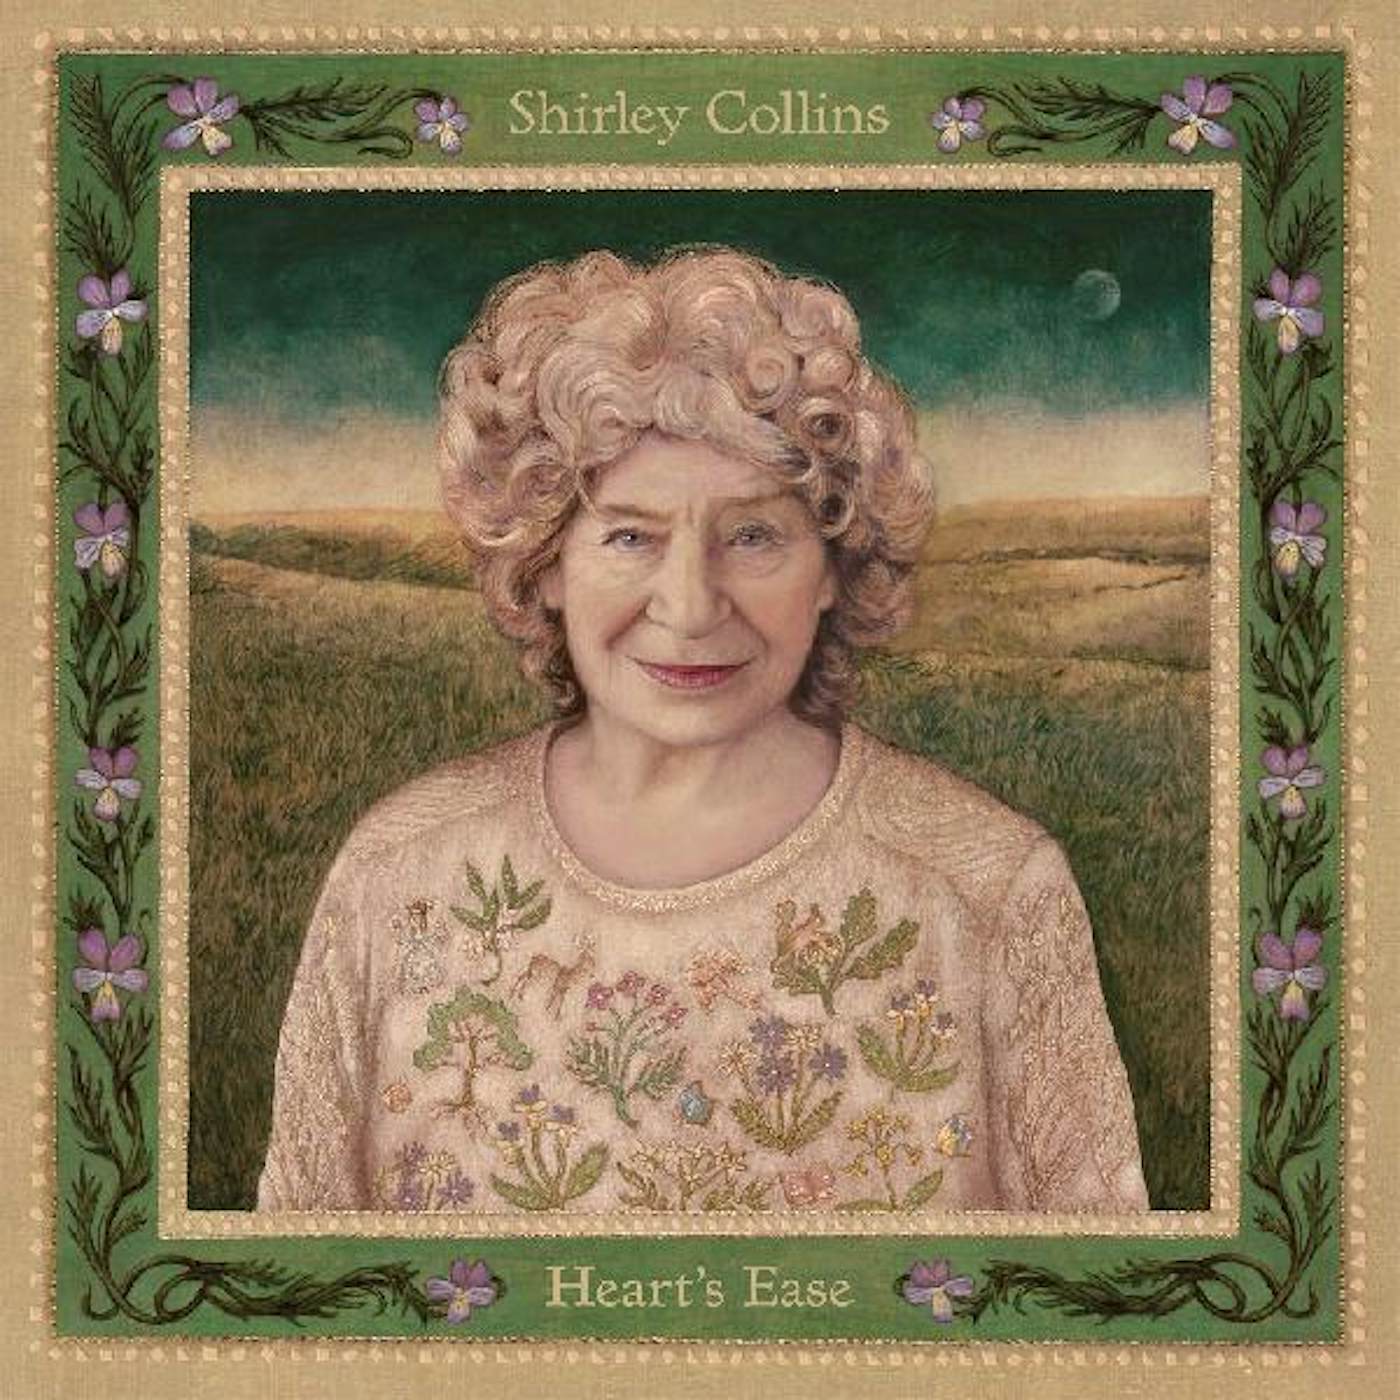 Shirley Collins HEART'S EASE (DL CARD) Vinyl Record